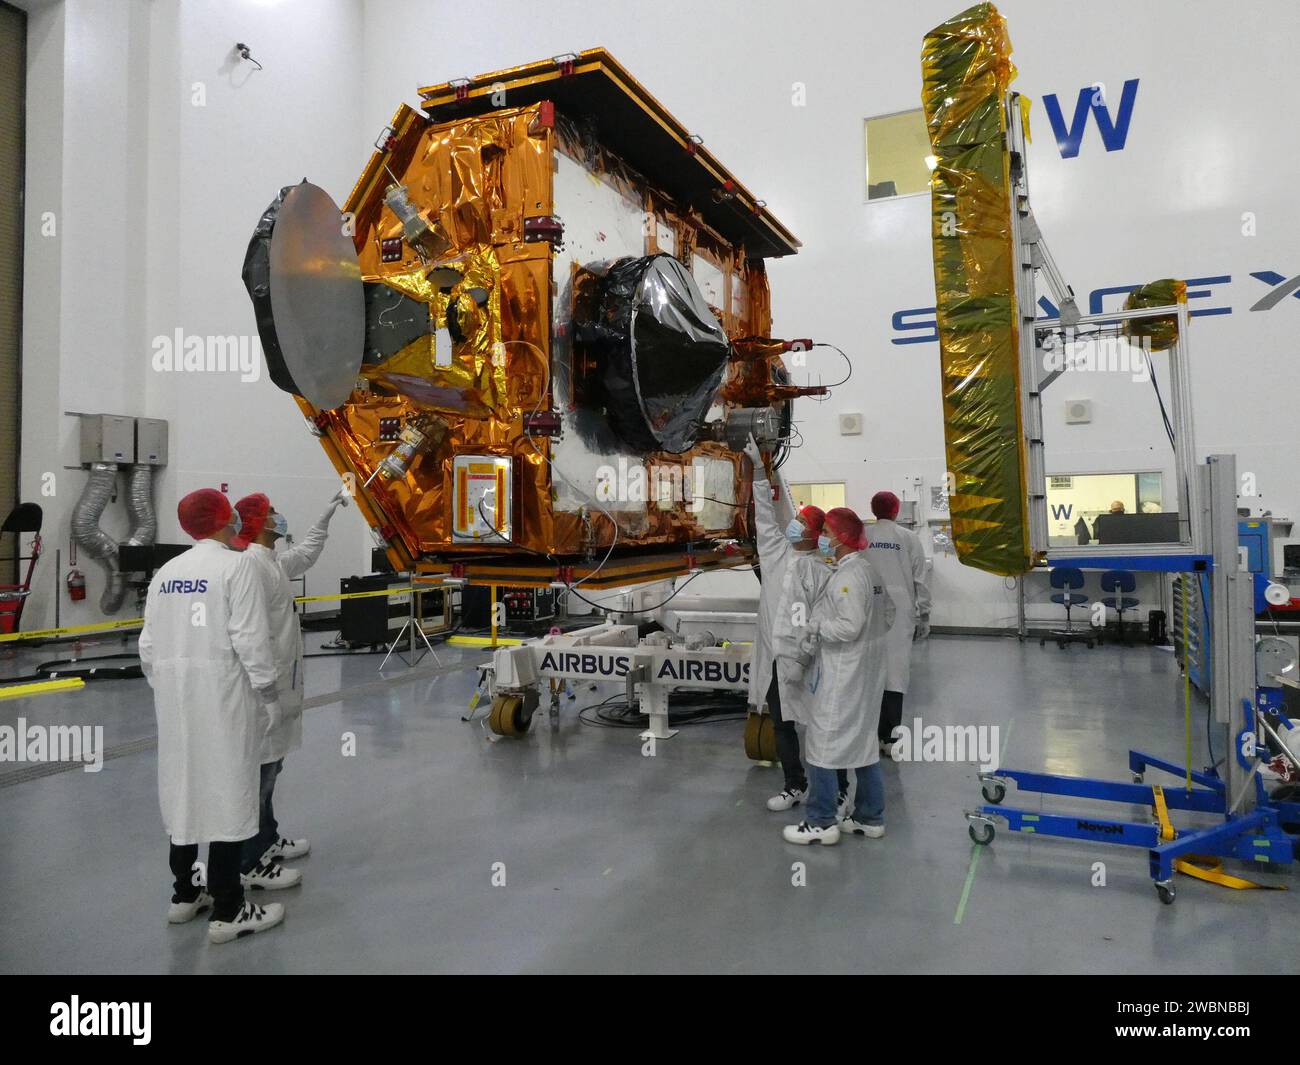 Sentinel-6 Michael Freilich team members from European Space Agency pose with the spacecraft during processing. Launch is scheduled for Nov. 11, 2020 from Vandenberg Air Force Base in California. NASA’s Launch Services Program based at Kennedy Space Center is responsible for launch management. Stock Photo